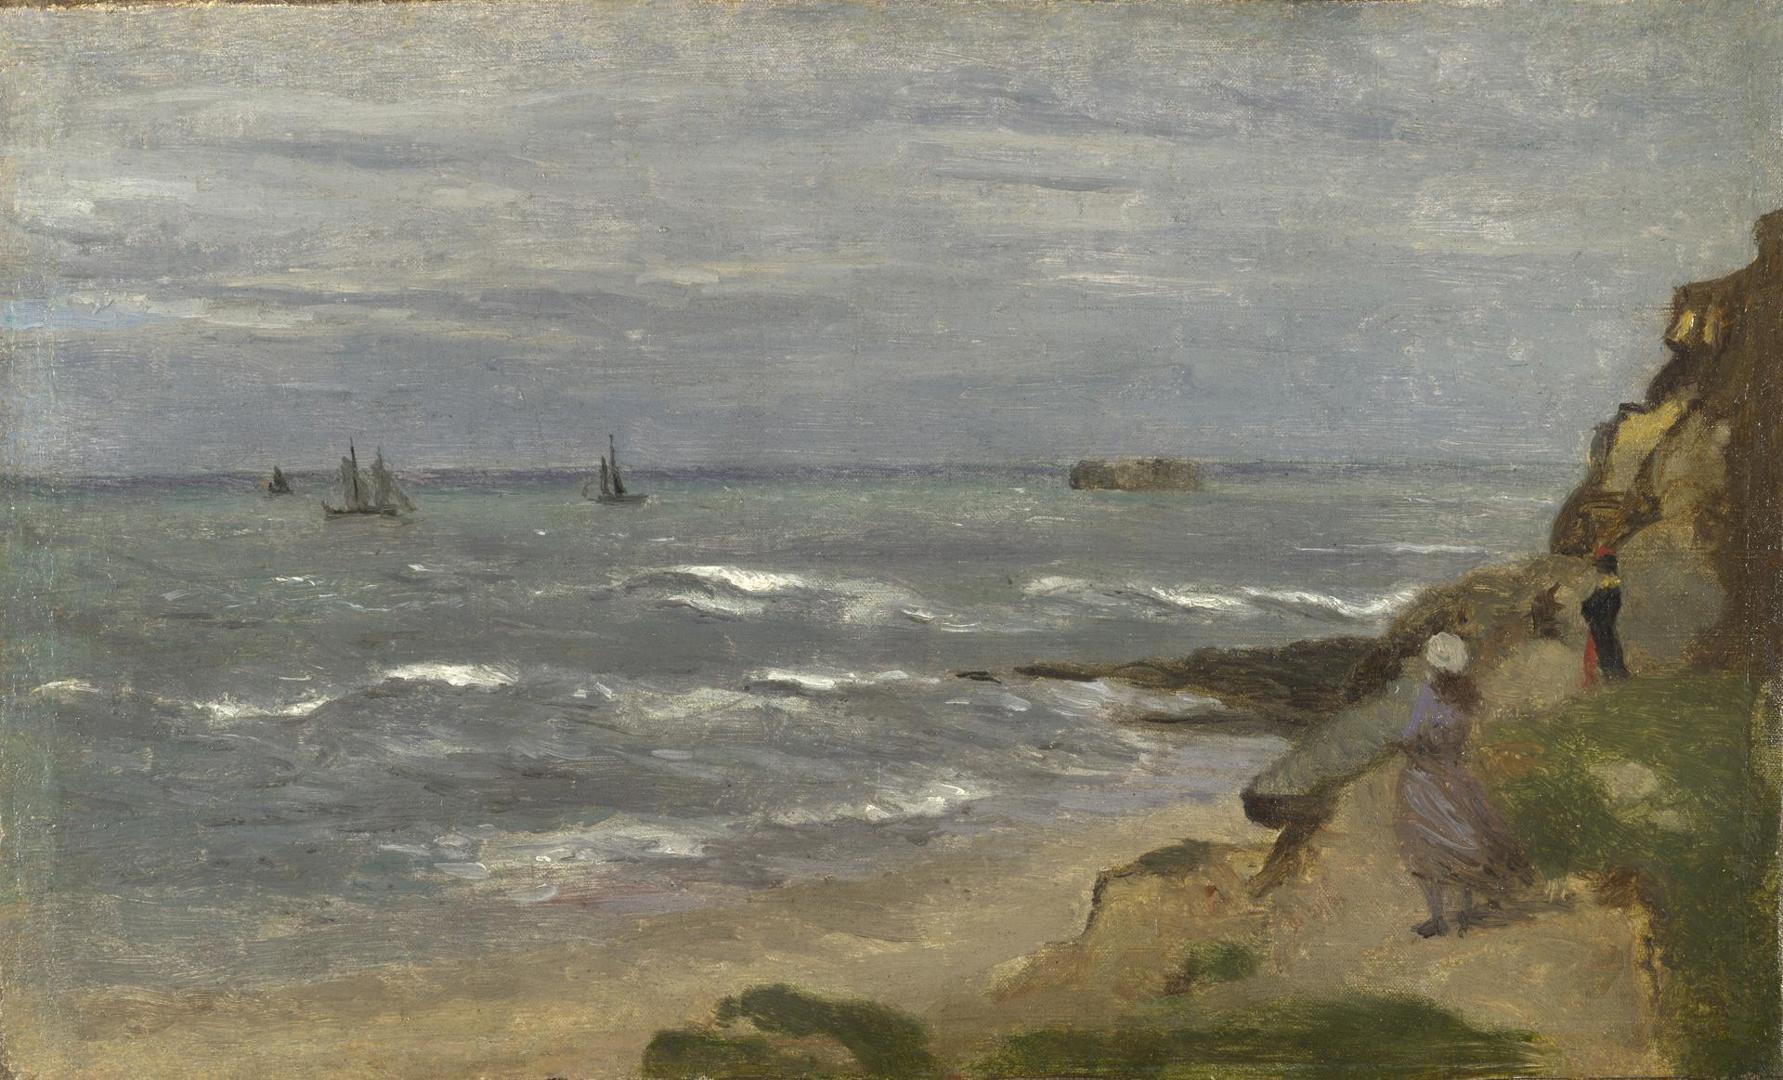 Seascape with Figures on Cliffs by Follower of Jean-Baptiste-Camille Corot